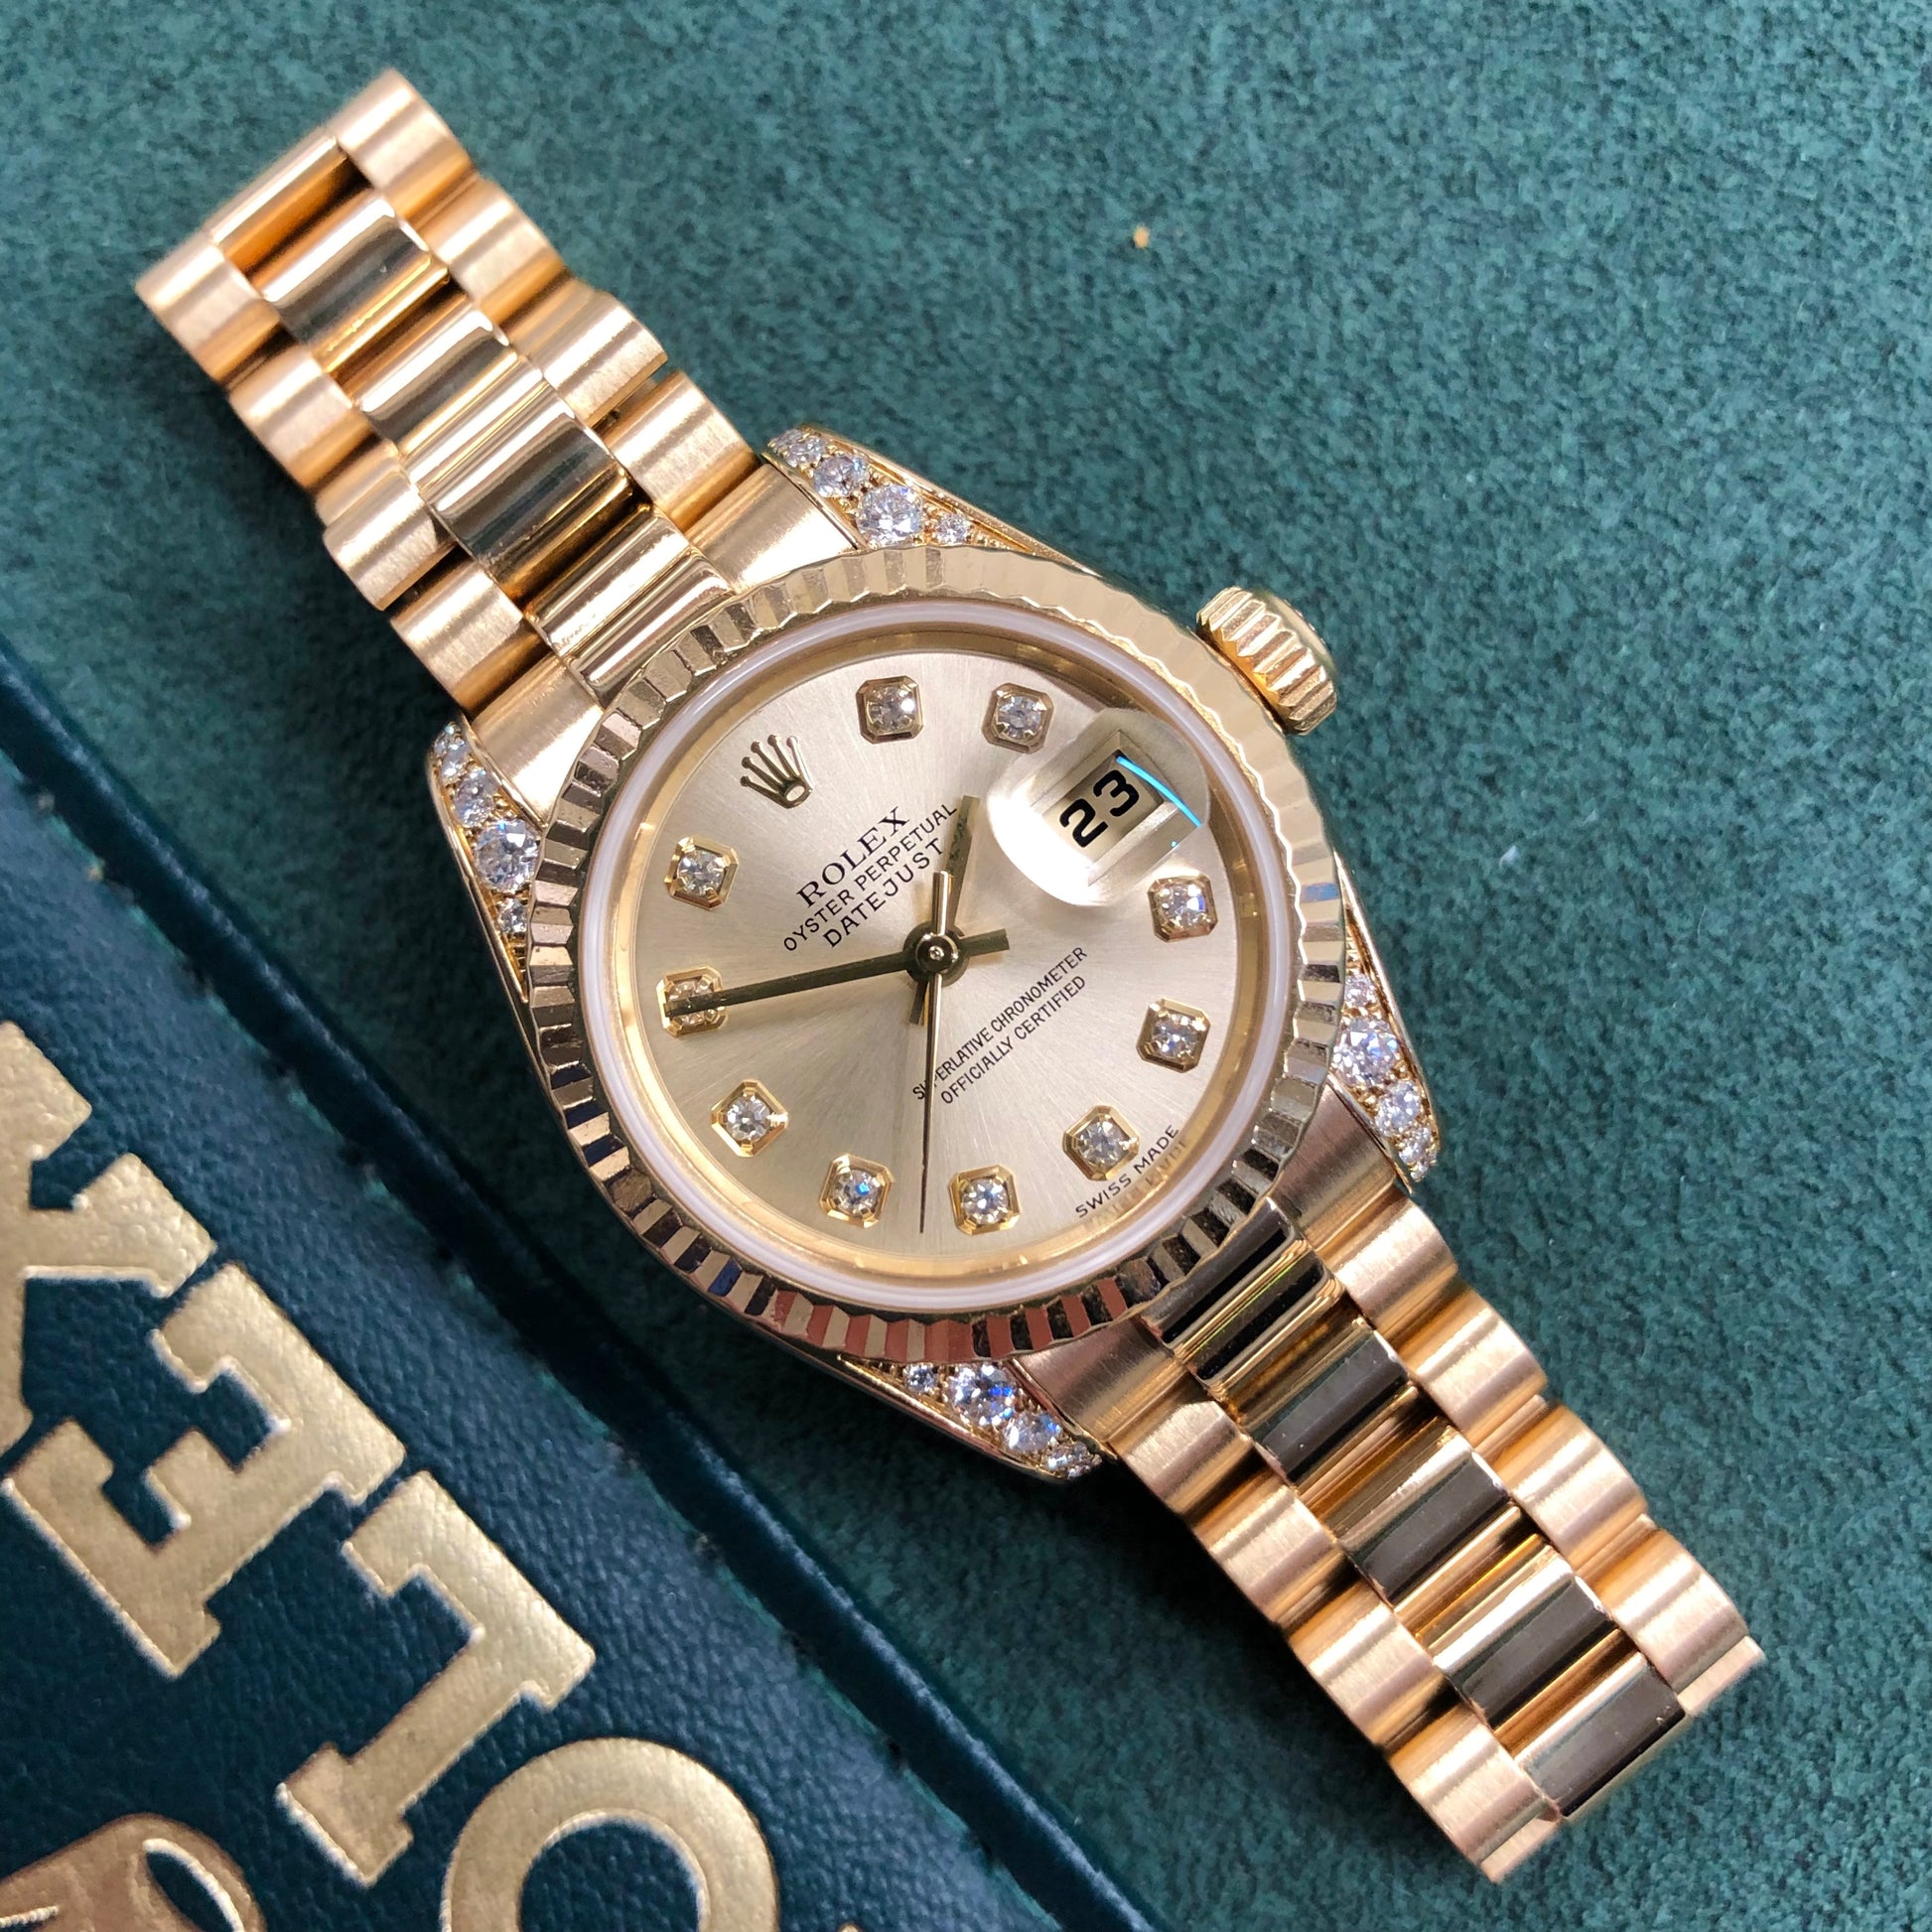 2001 Rolex Datejust 179238 Ladies President Diamond Lugs and Dial Yellow Gold Wristwatch - Hashtag Watch Company